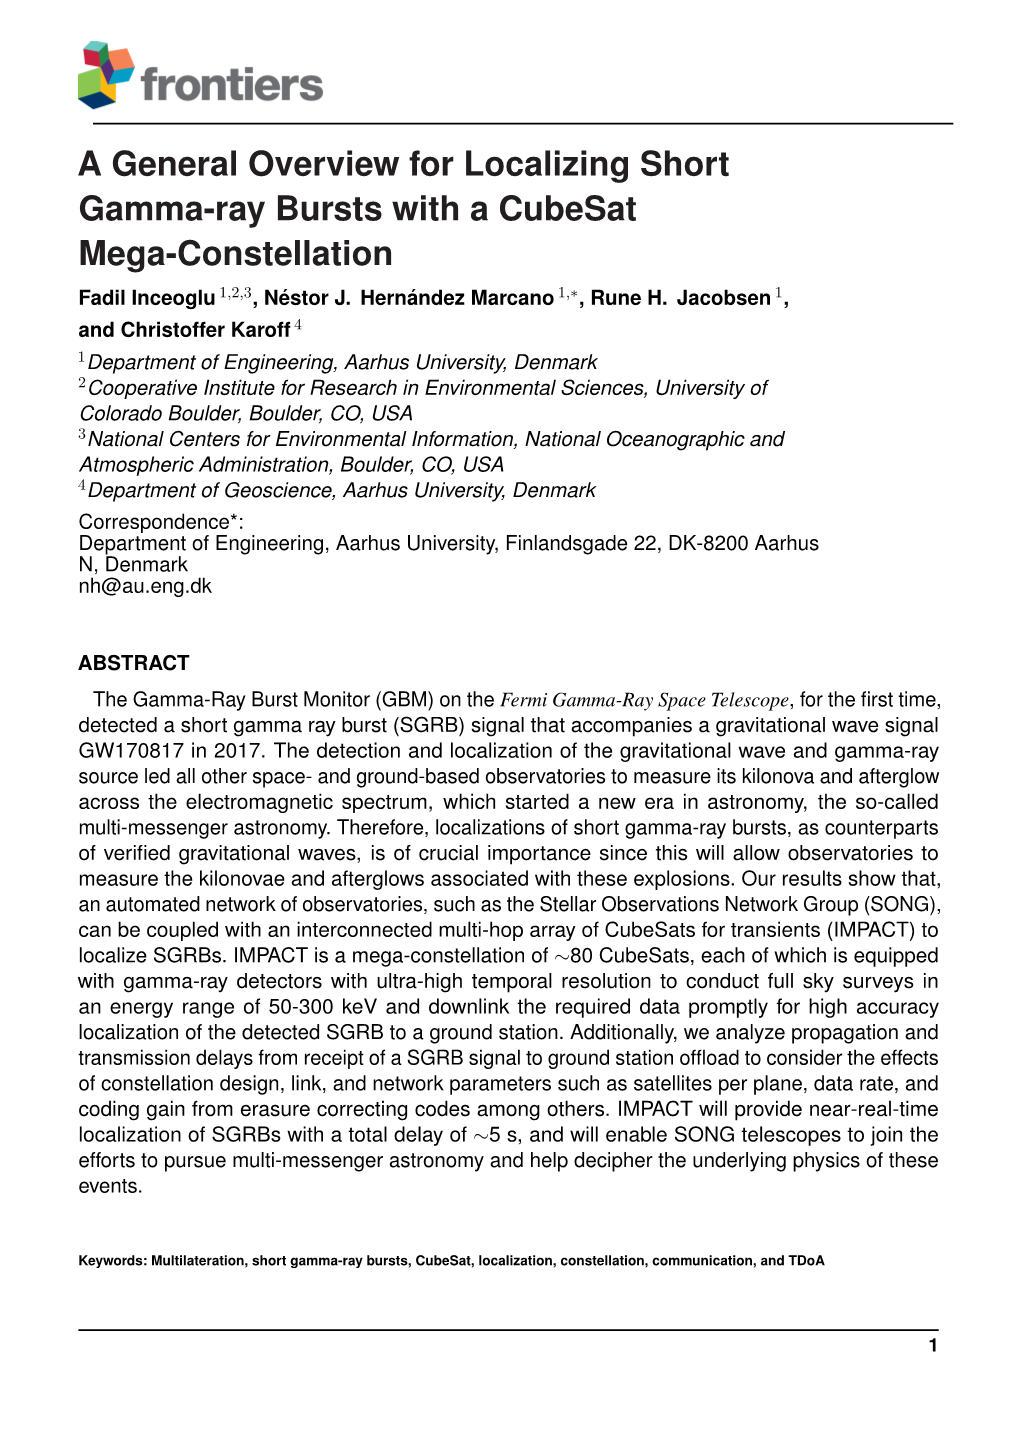 A General Overview for Localizing Short Gamma-Ray Bursts with a Cubesat Mega-Constellation Fadil Inceoglu 1,2,3,Nestor´ J